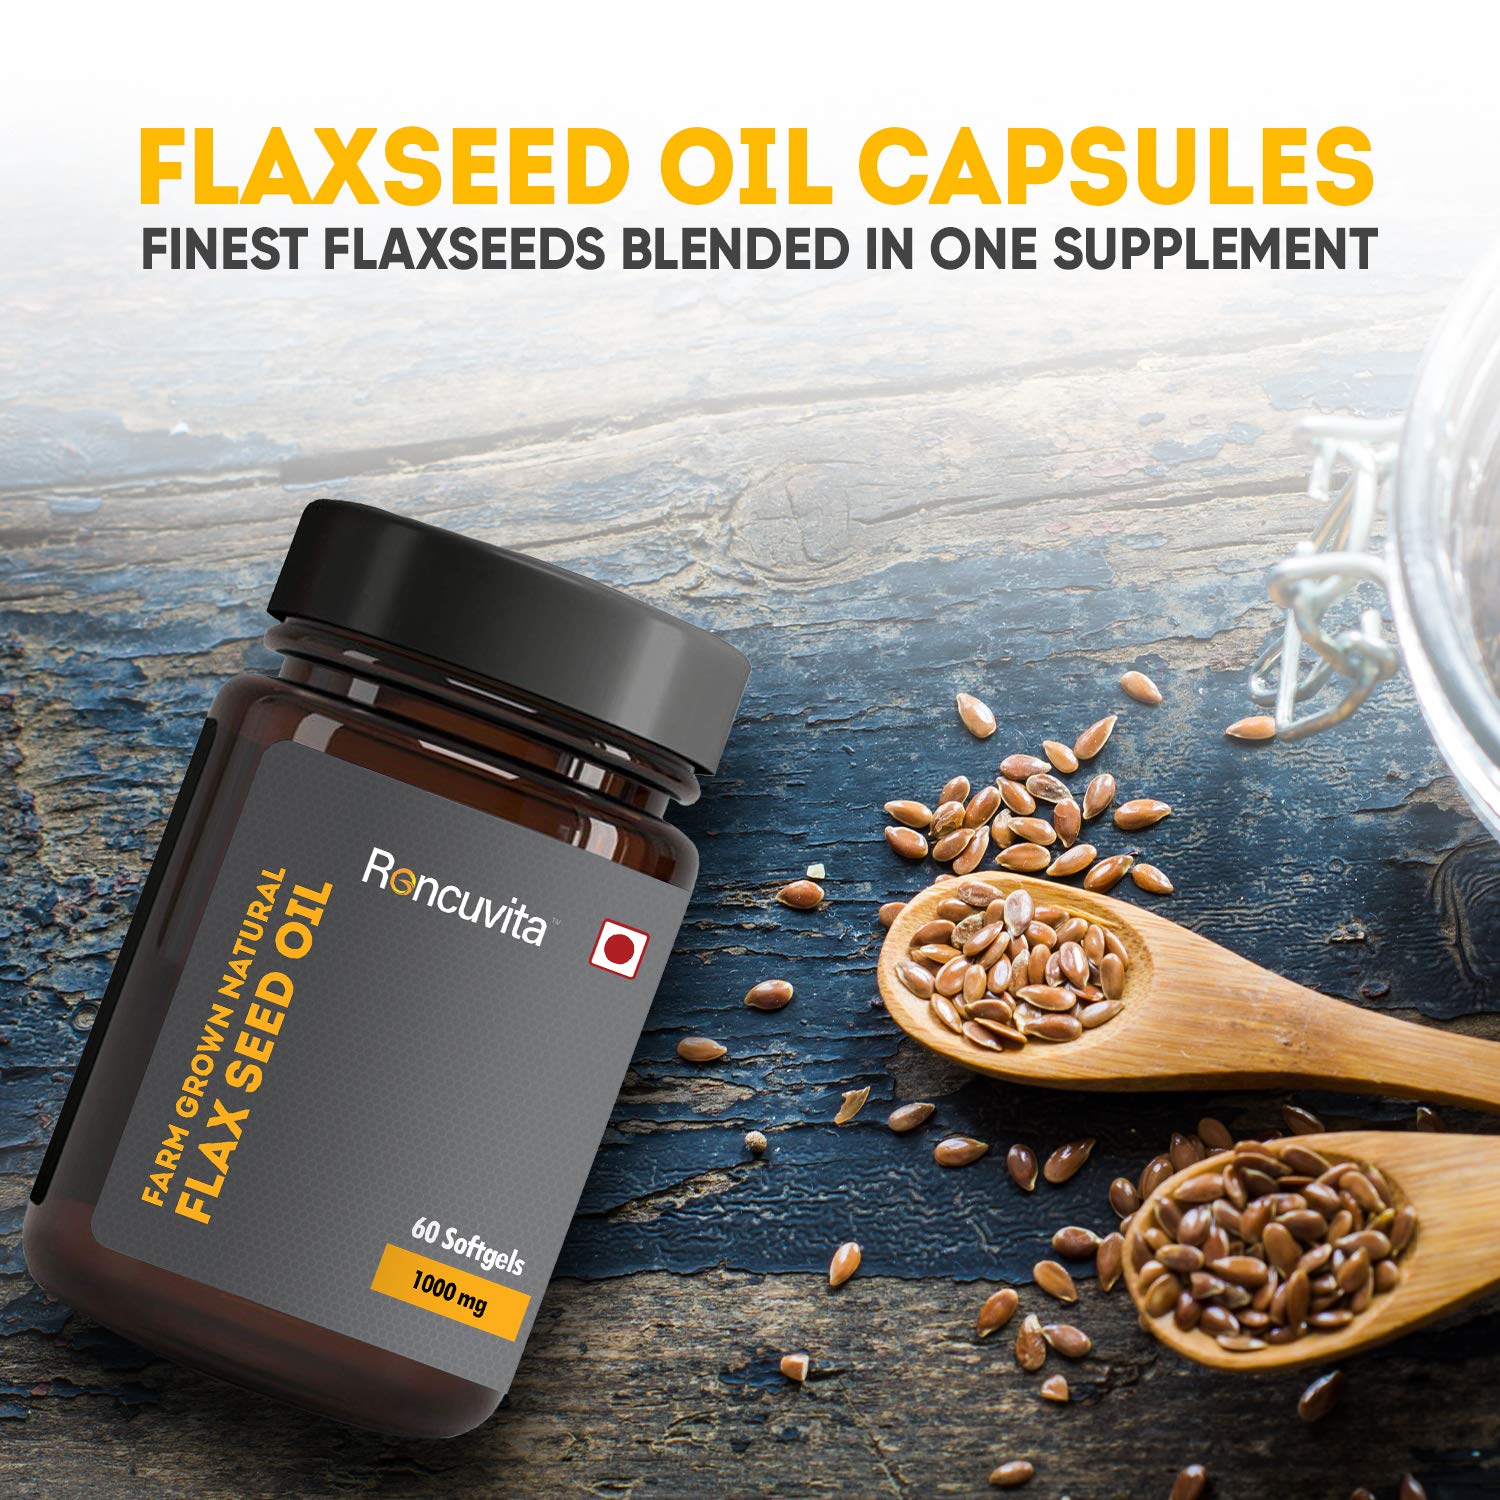 Is Flaxseed Oil Omega Good for Weight Loss?